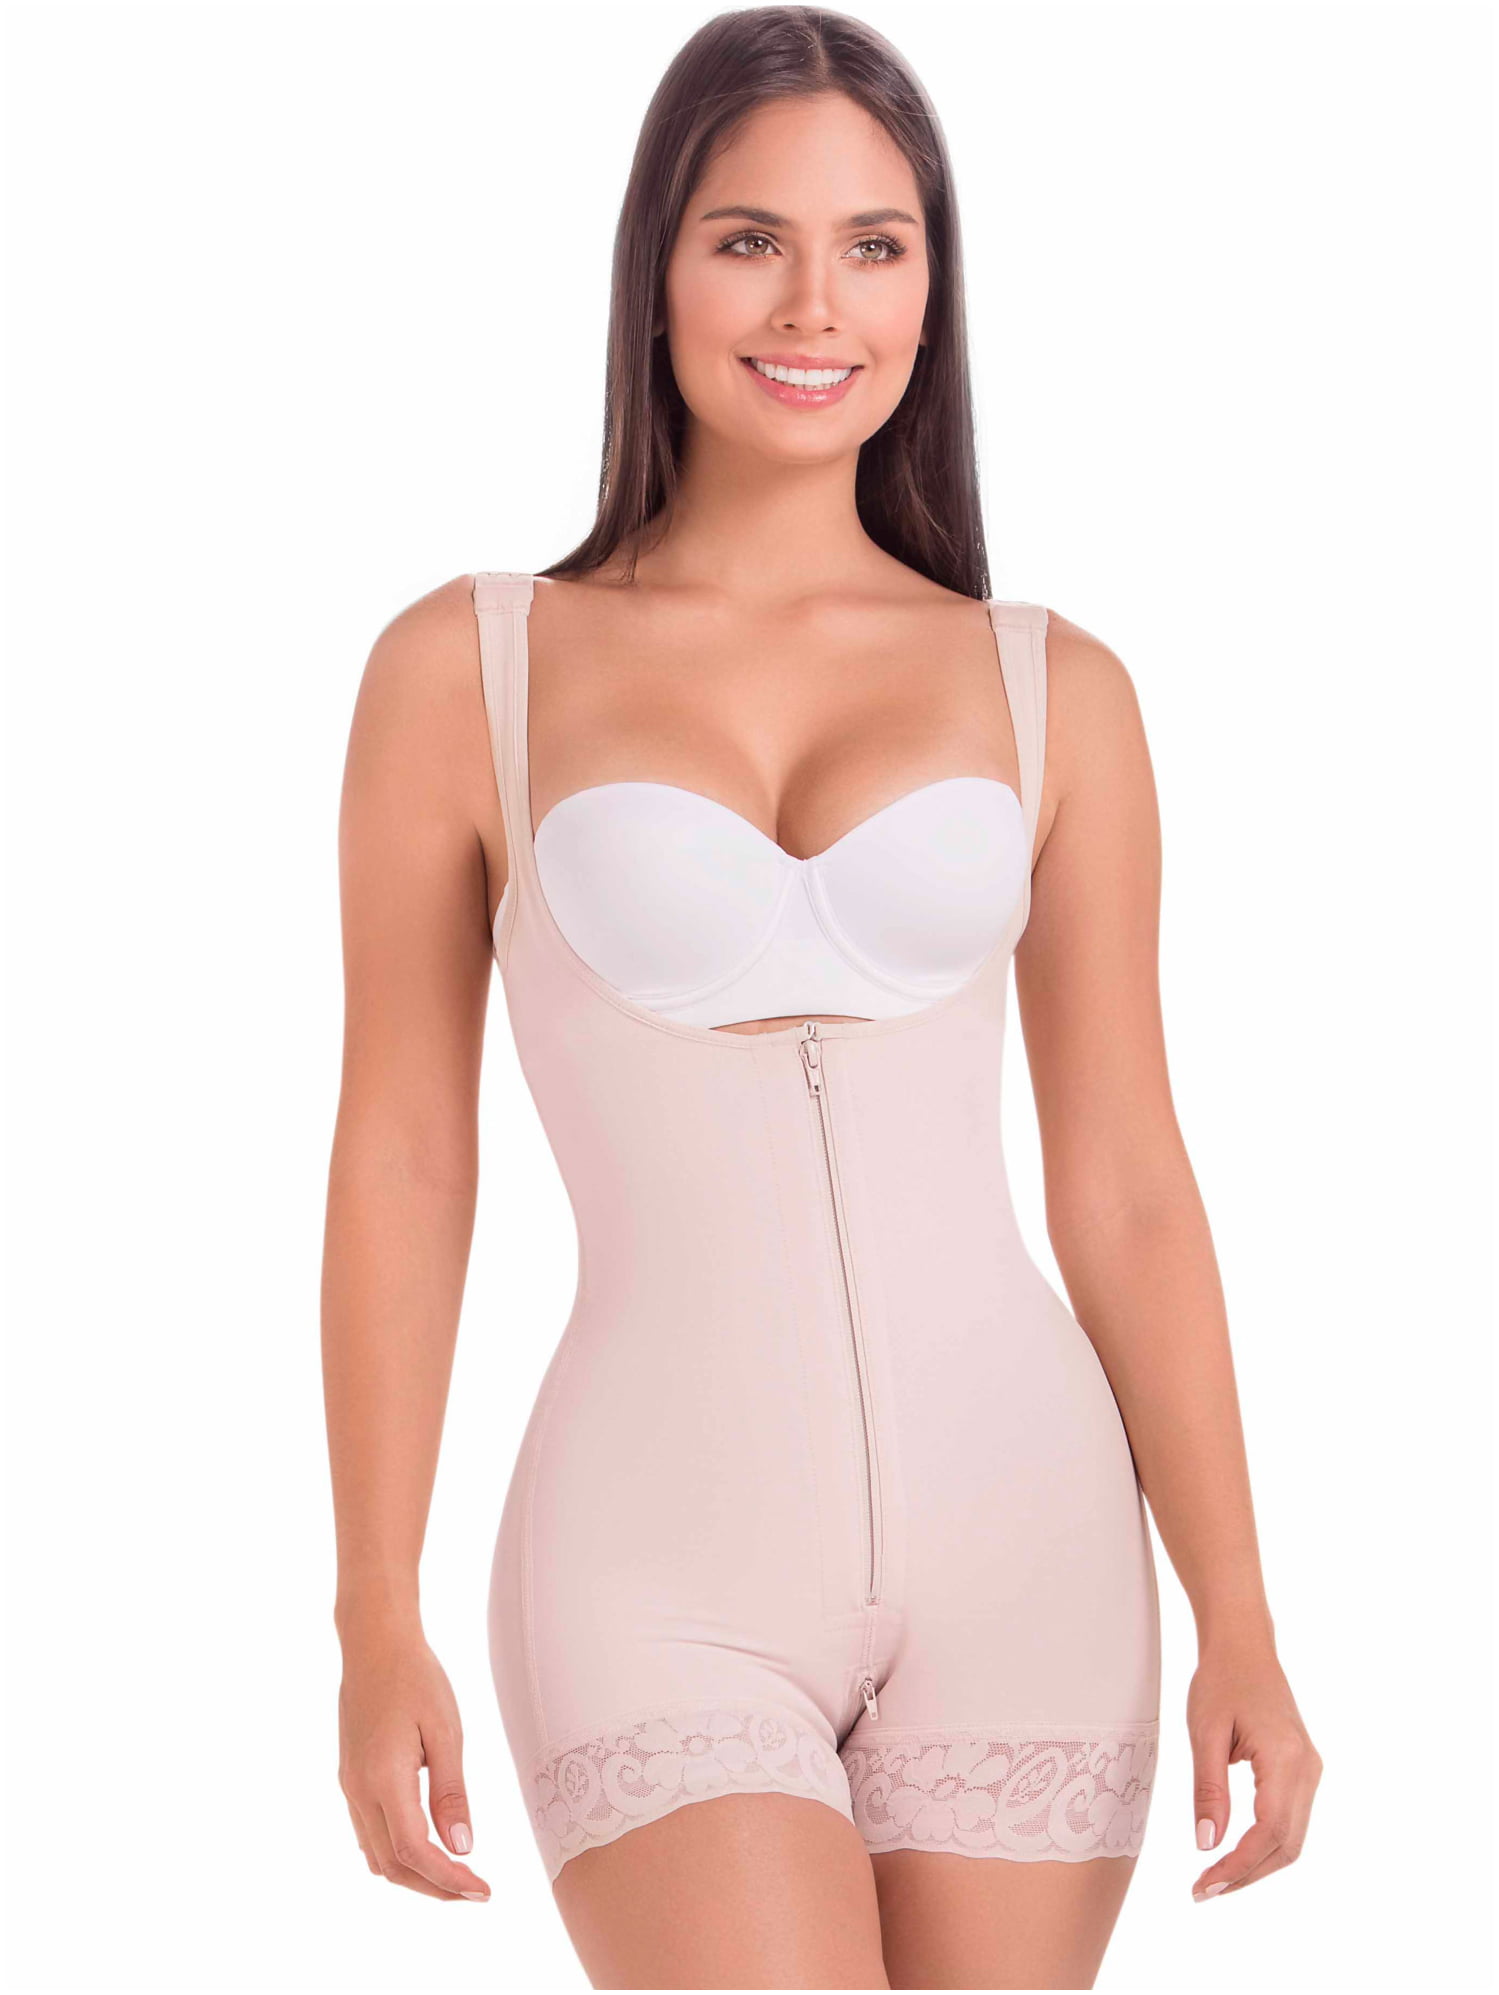 Womens Post-Partum Strapless Butt Lifter Compression Girdle Body Shaper 